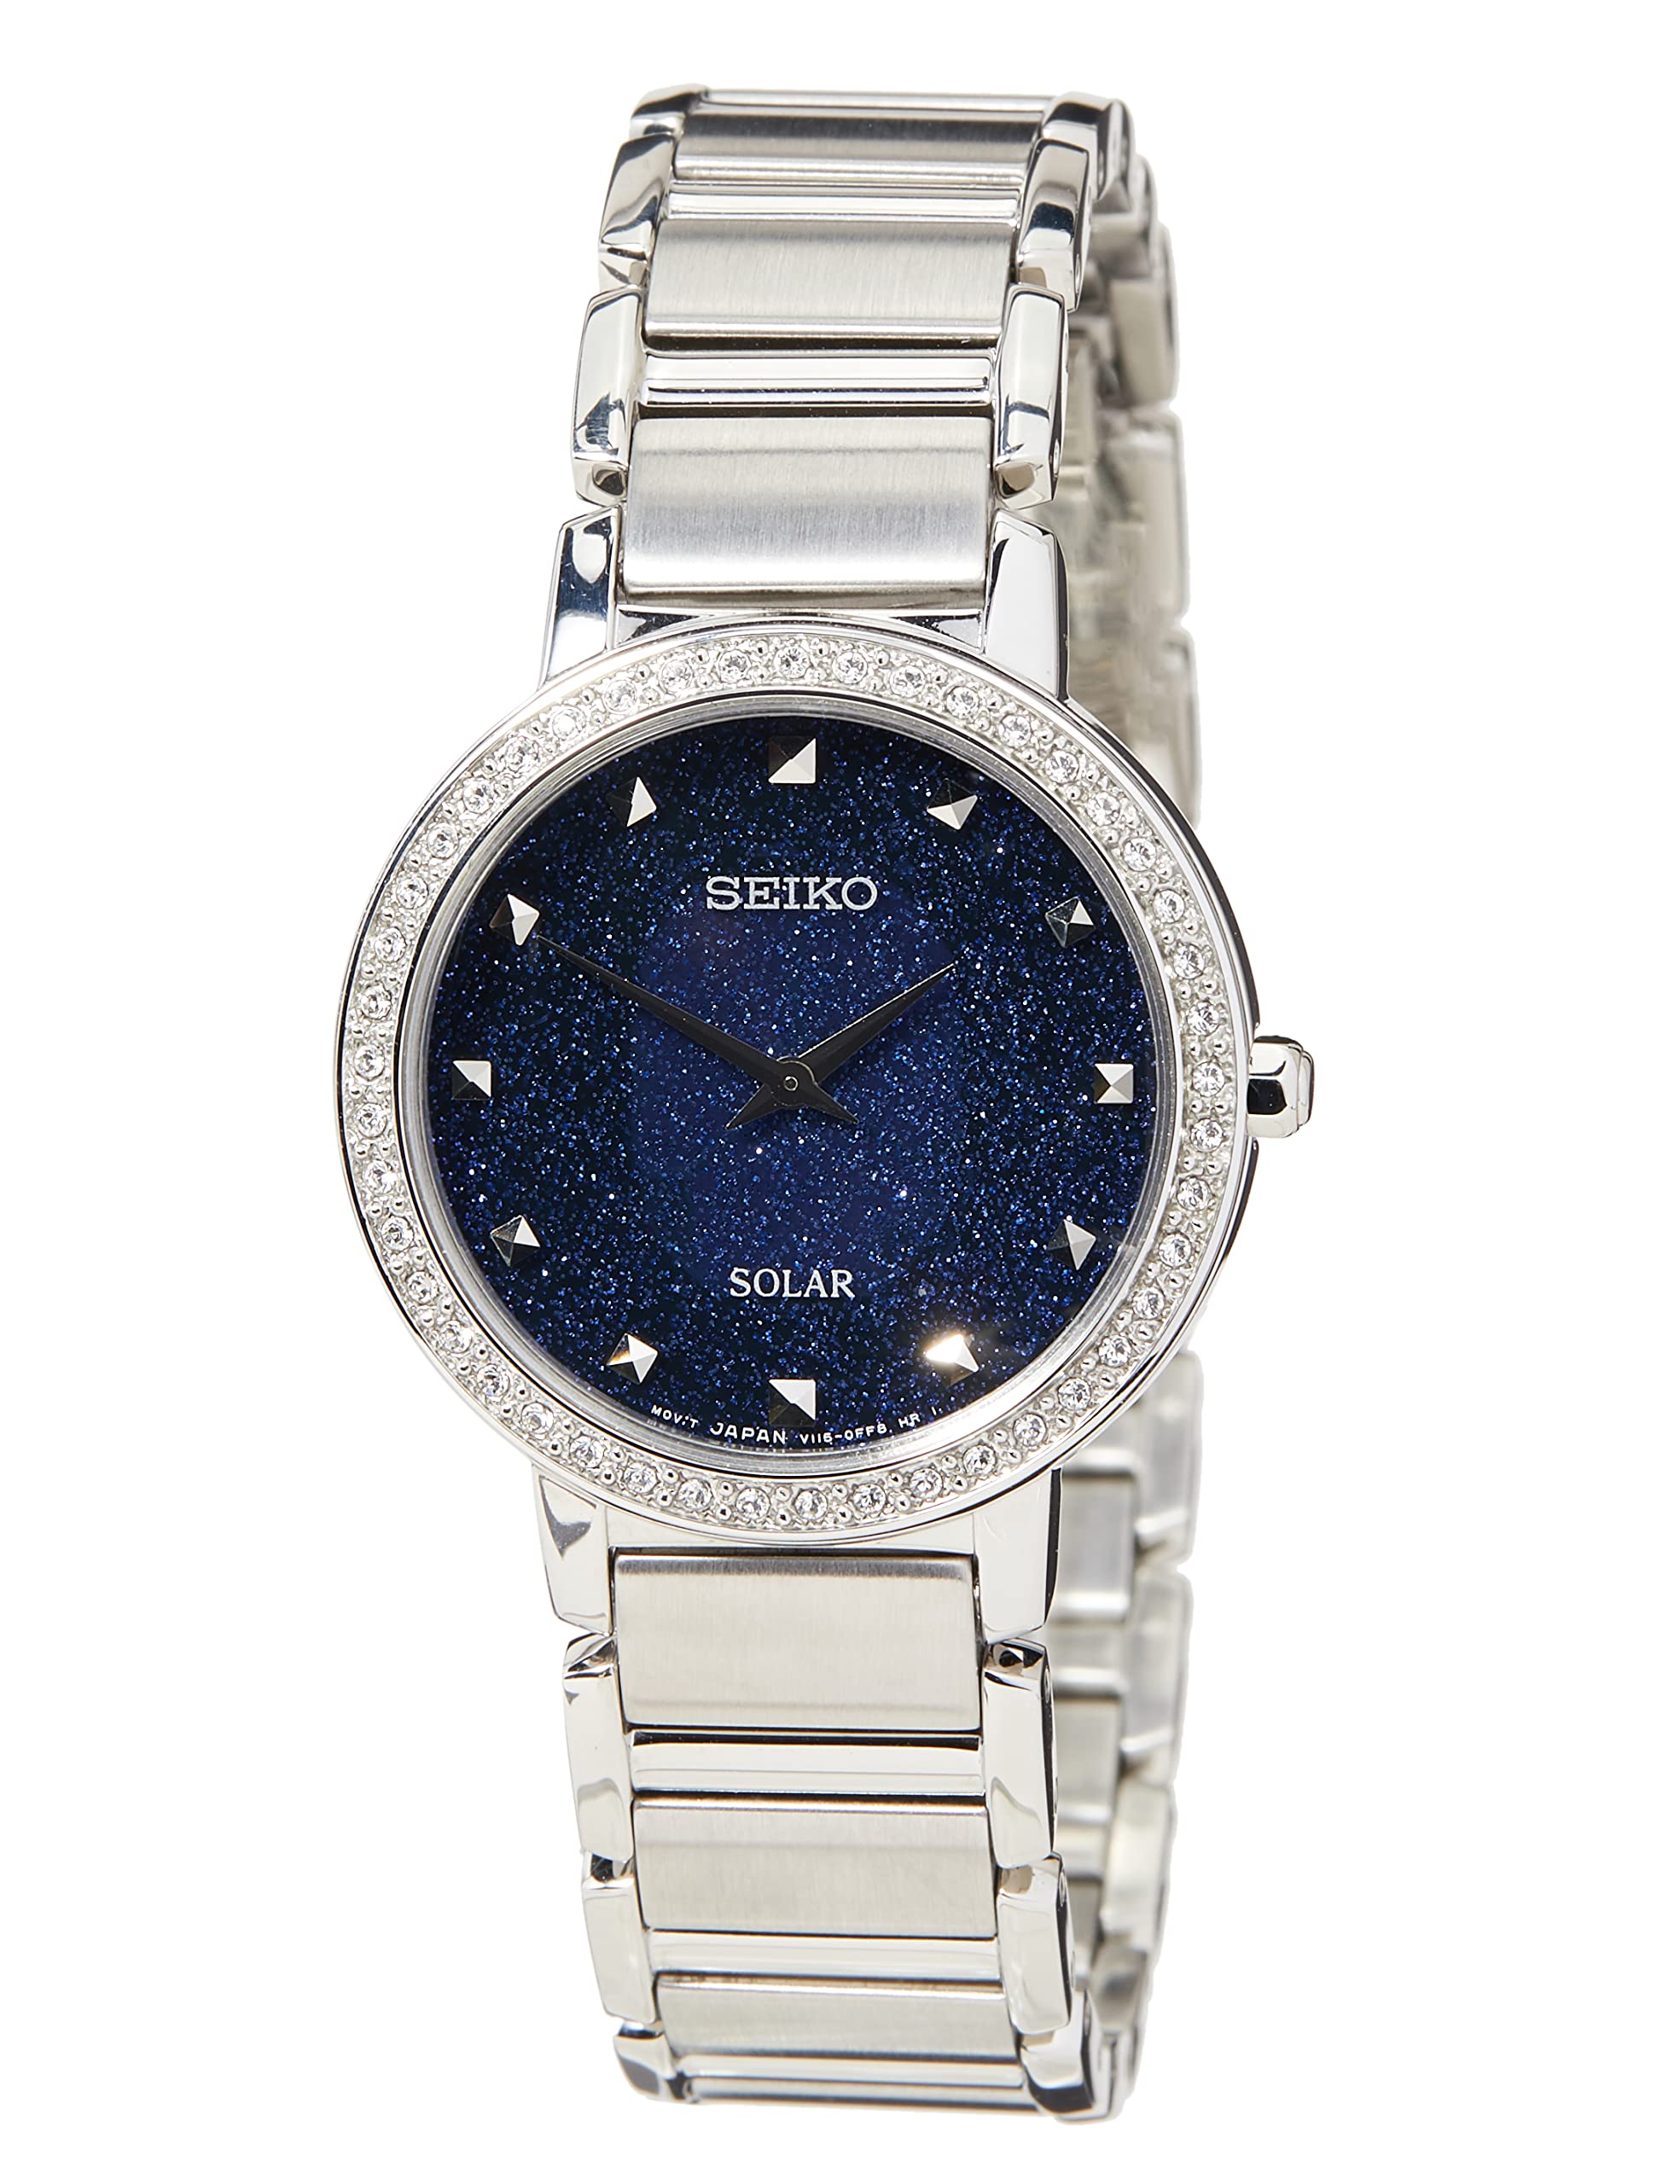 SEIKO Womens Analogue Quartz Watch with Stainless Steel Strap SUP433P1, Blue, One Size, Bracelet